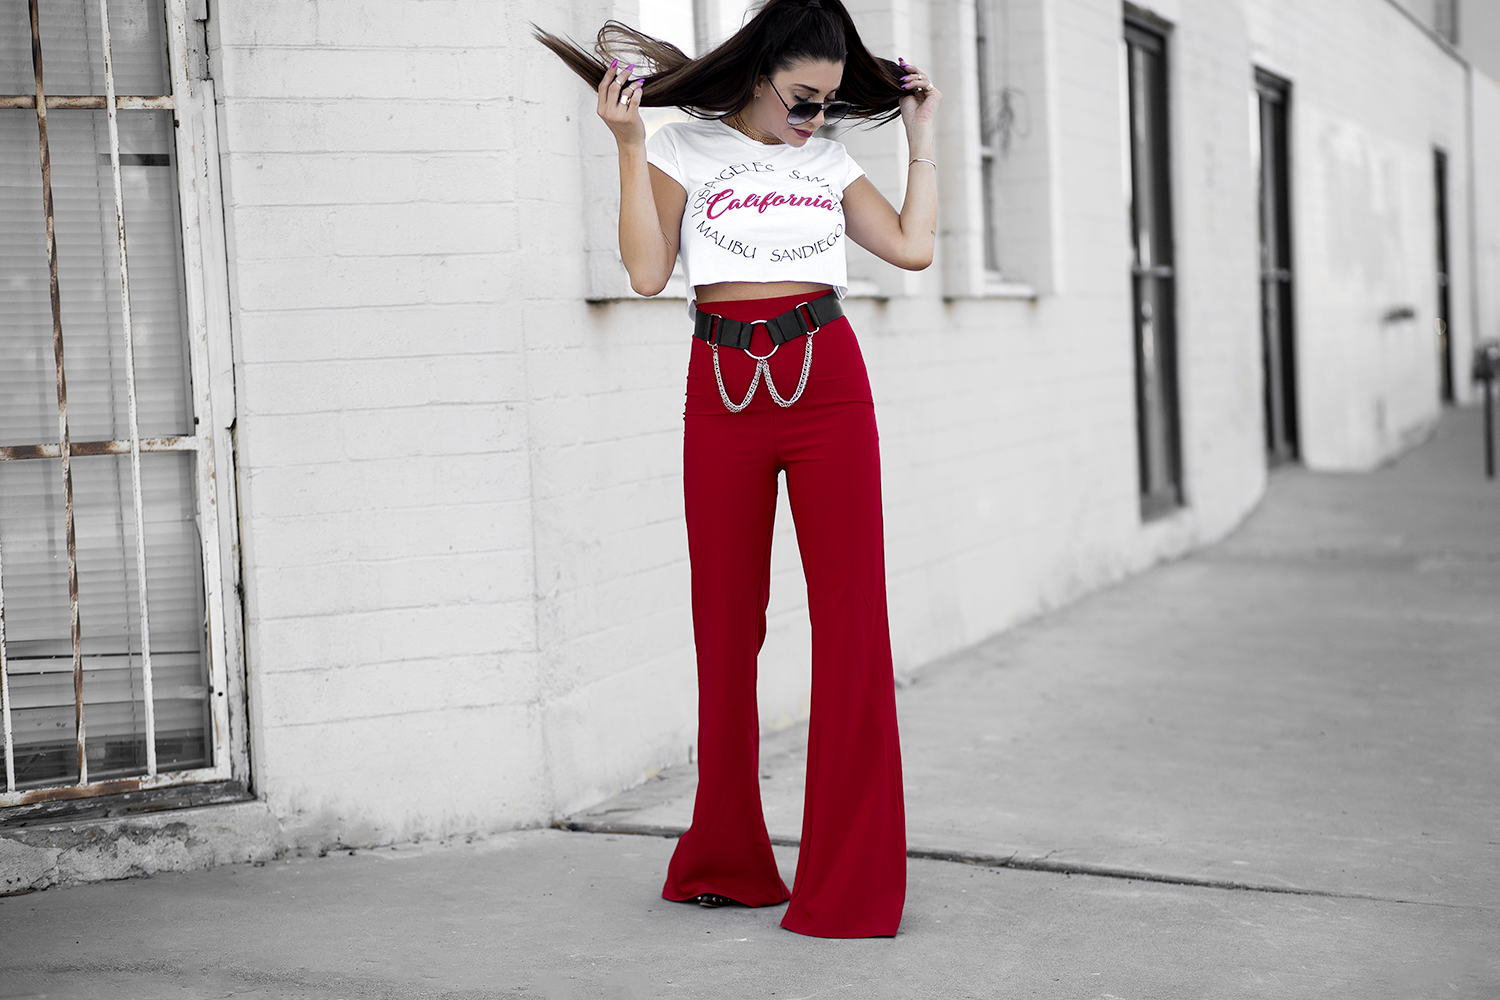 high waisted red pants in blog post about selfies and narcissism